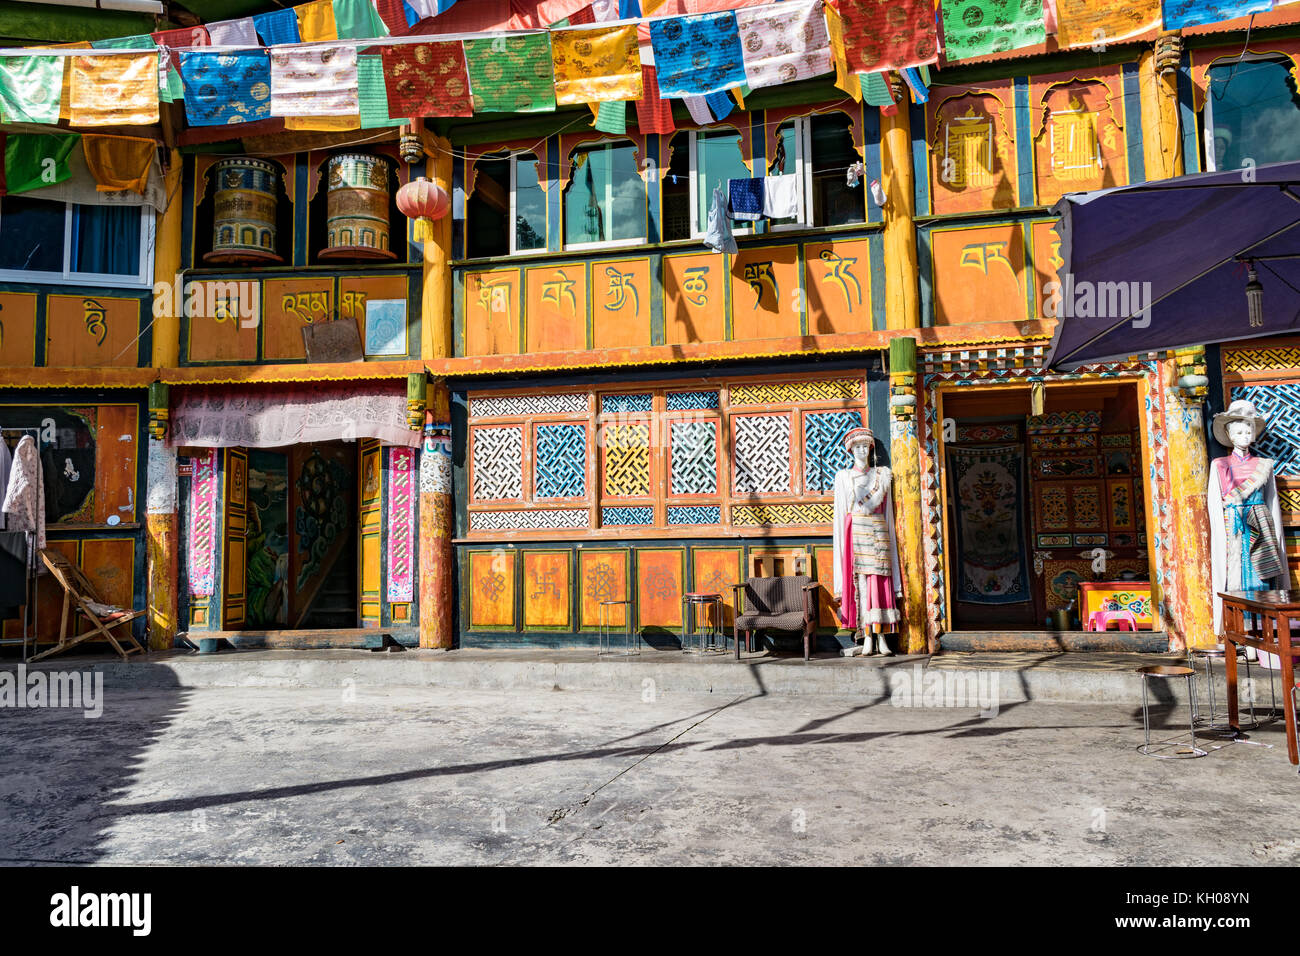 Tibetan village house in Sichuan province, China Stock Photo